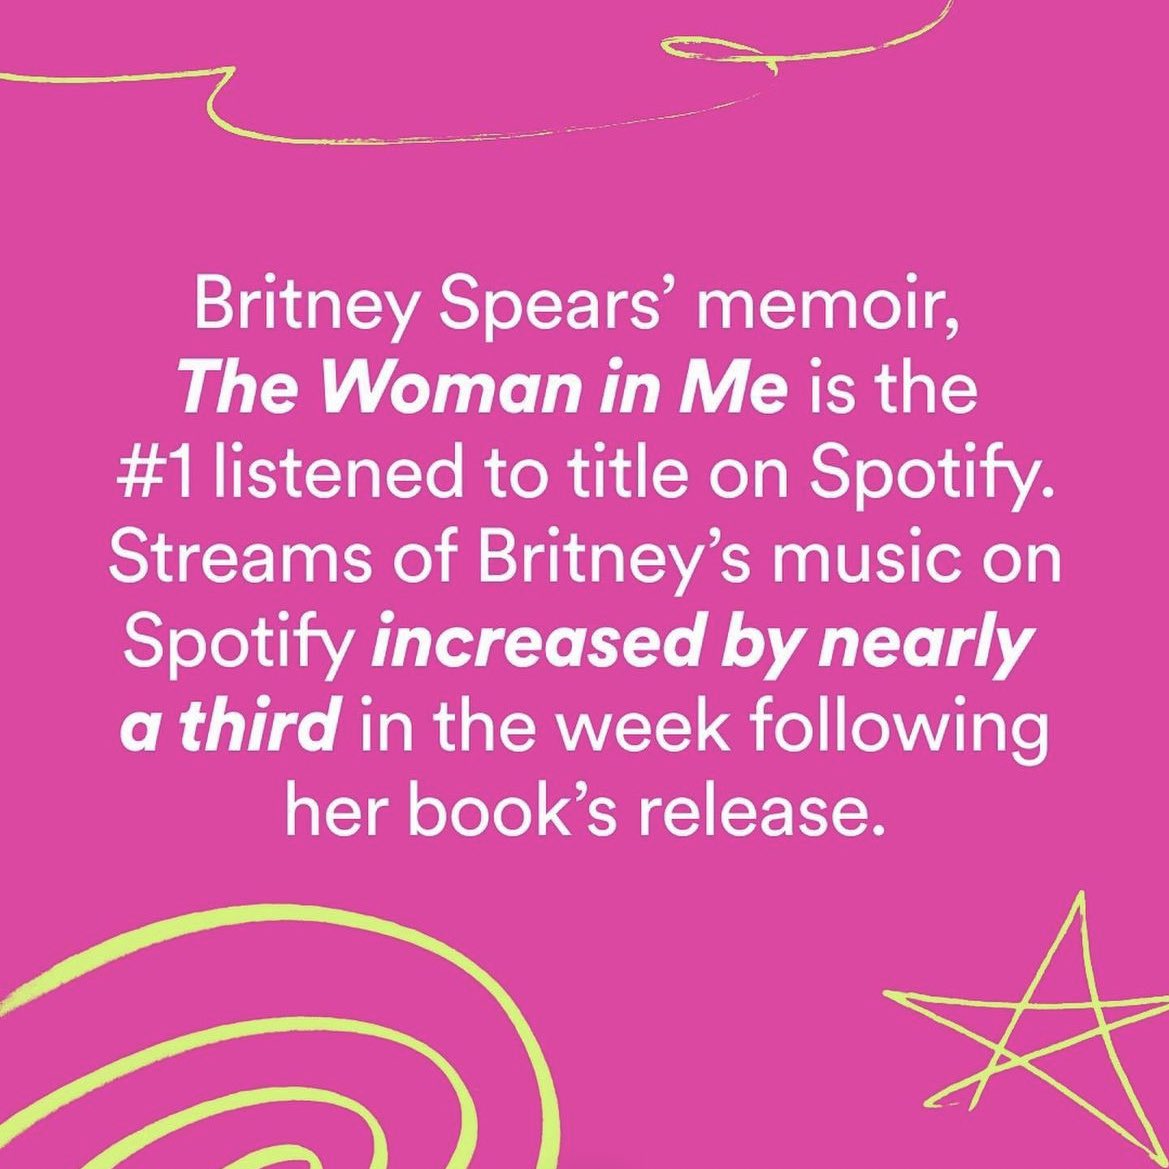 Spotify reveals that #TheWomanInMe is the #1 most listened to audiobook on the platform. 🥇